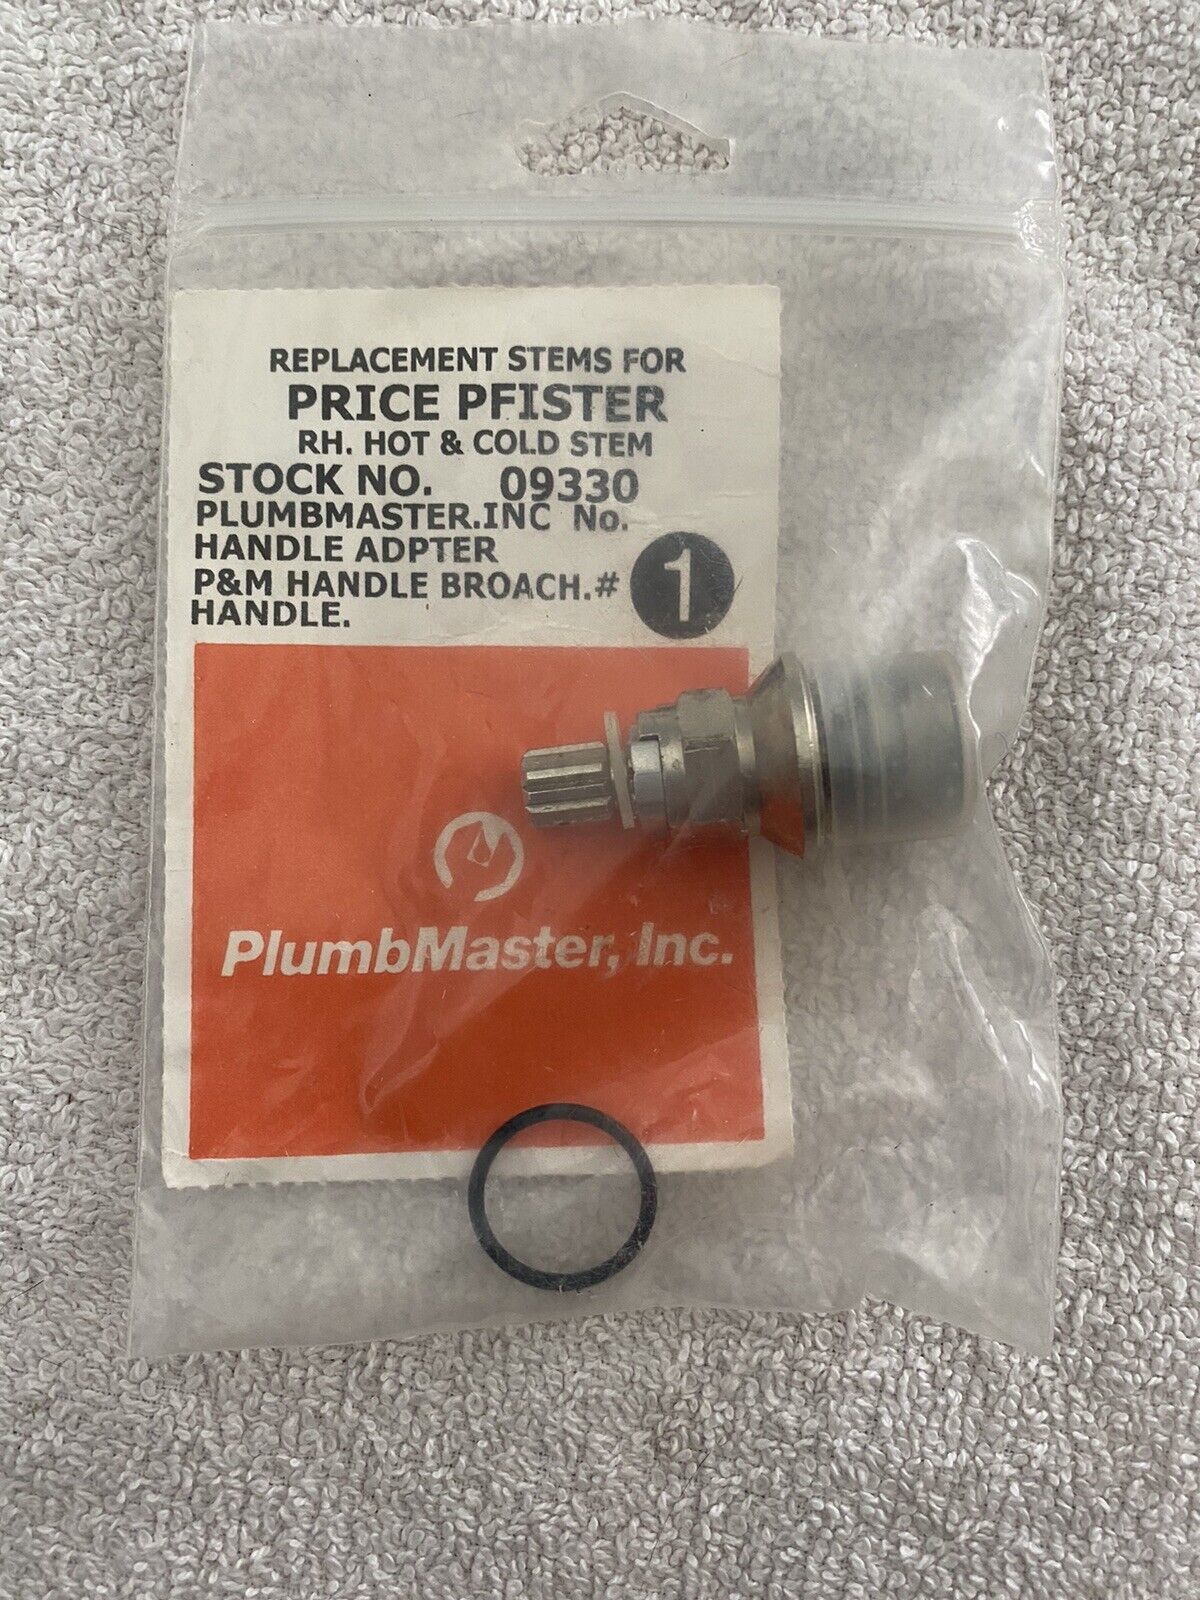 PlumbMaster Hot/Cold Stem For Price Pfister Faucets -09330 - P&M Handle Broach - $9.95